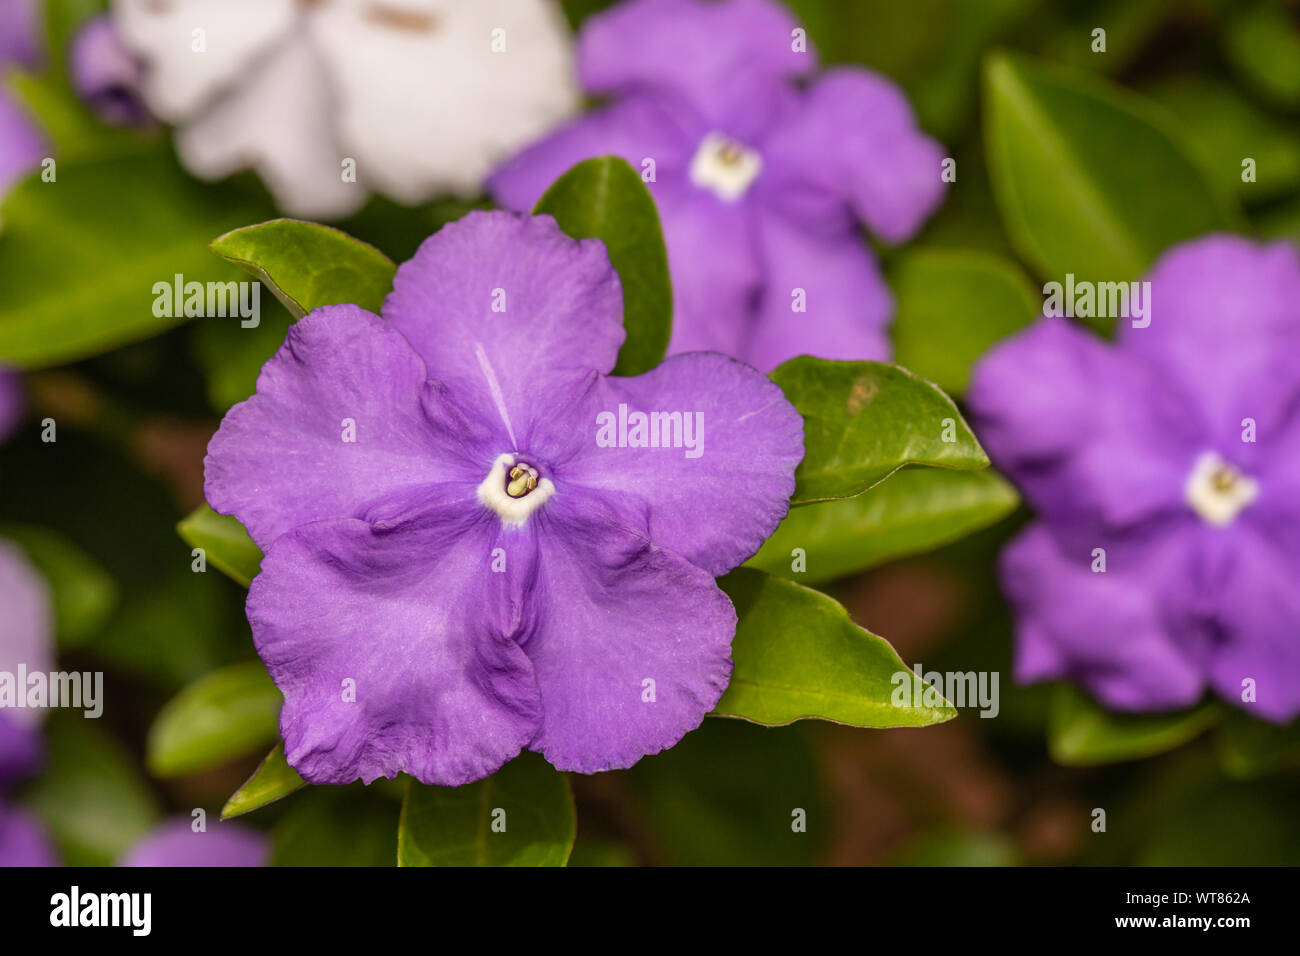 Colour close-up photograph of multiple African violet flowers with only one in-focus in foreground. Stock Photo